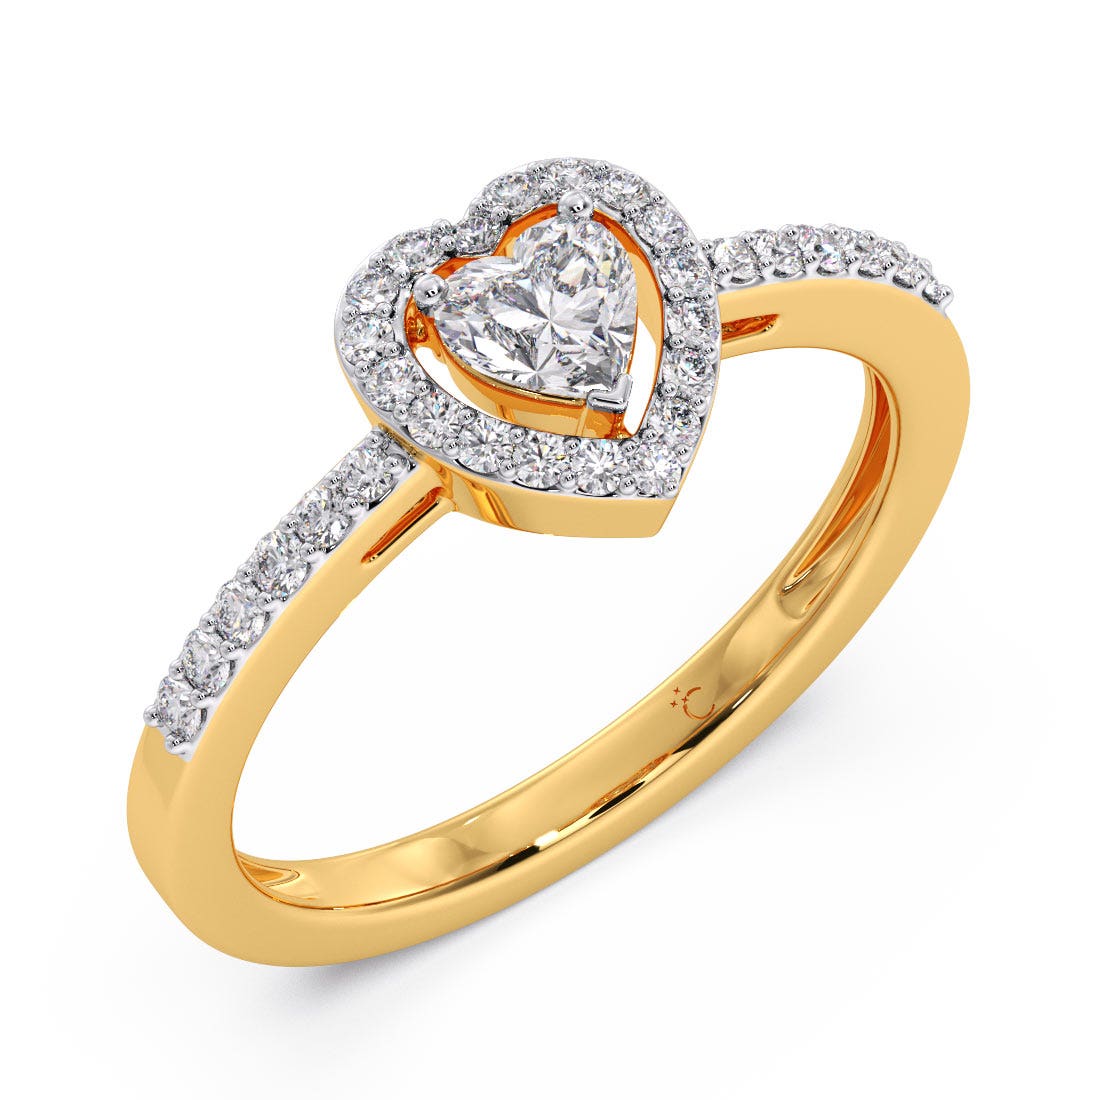 Halo Heart Solitaire Diamond Engagement Ring